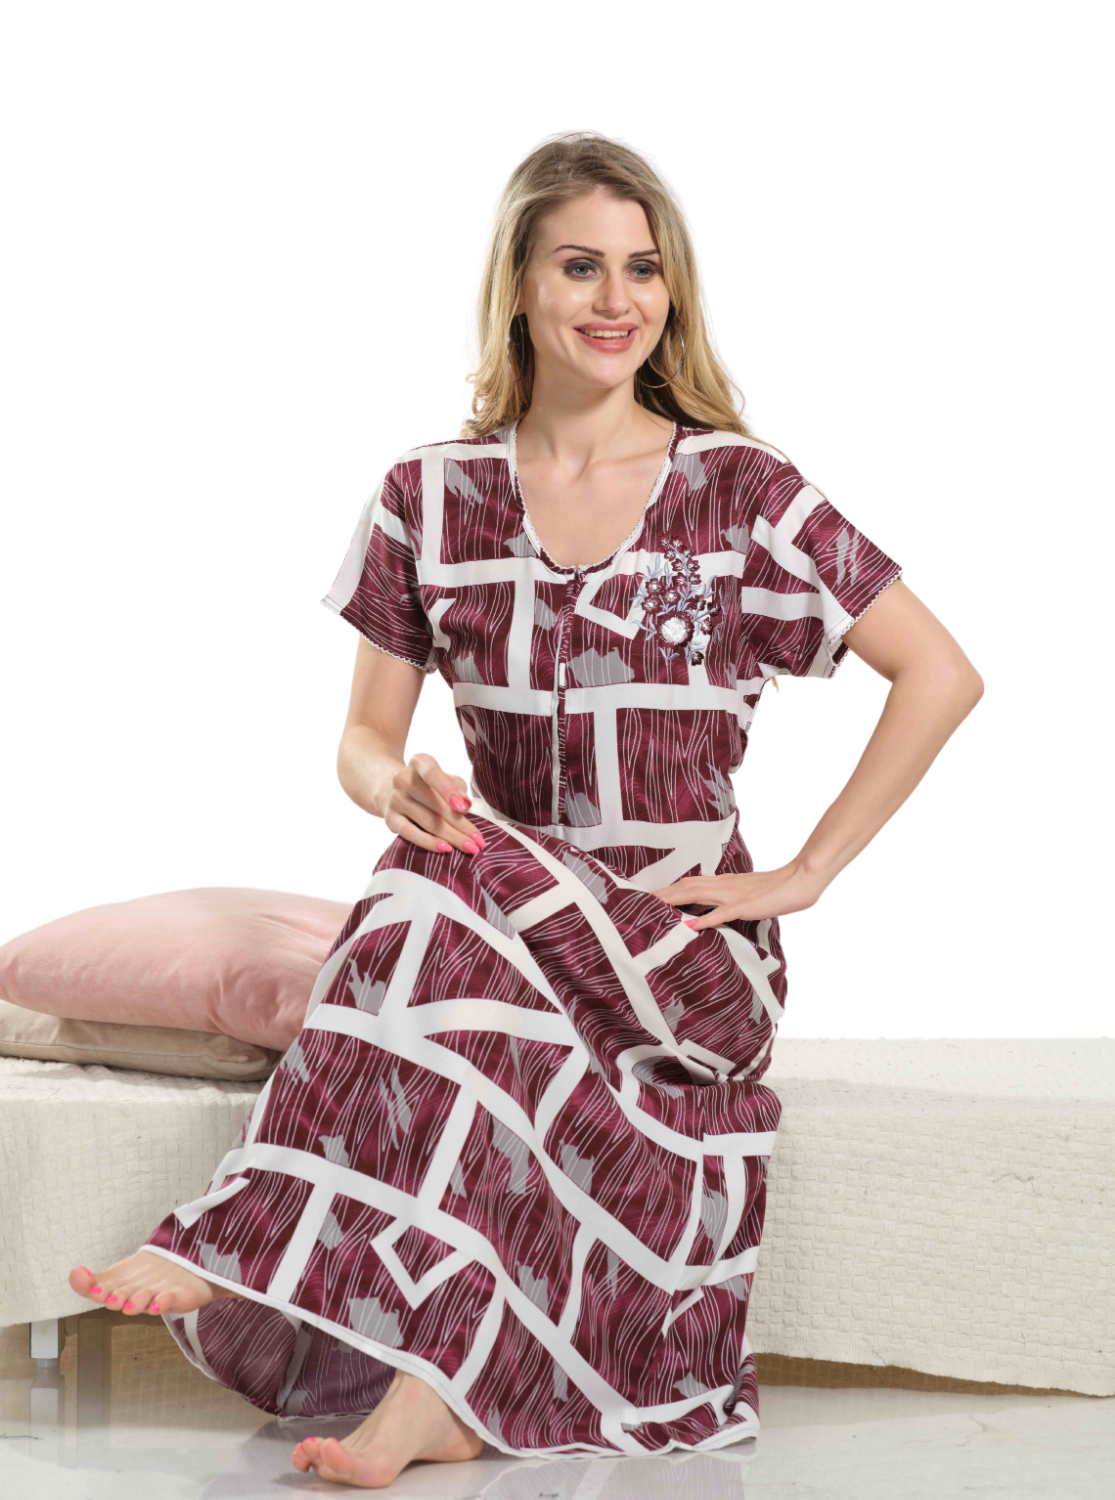 New Arrivals MANGAI Alpine Embroidery Model Nighties | Full Length | Stylish Printed Model Nighties | Side Pocket | Half Sleeve | Perfect Nightwear Collection's for Trendy Women's